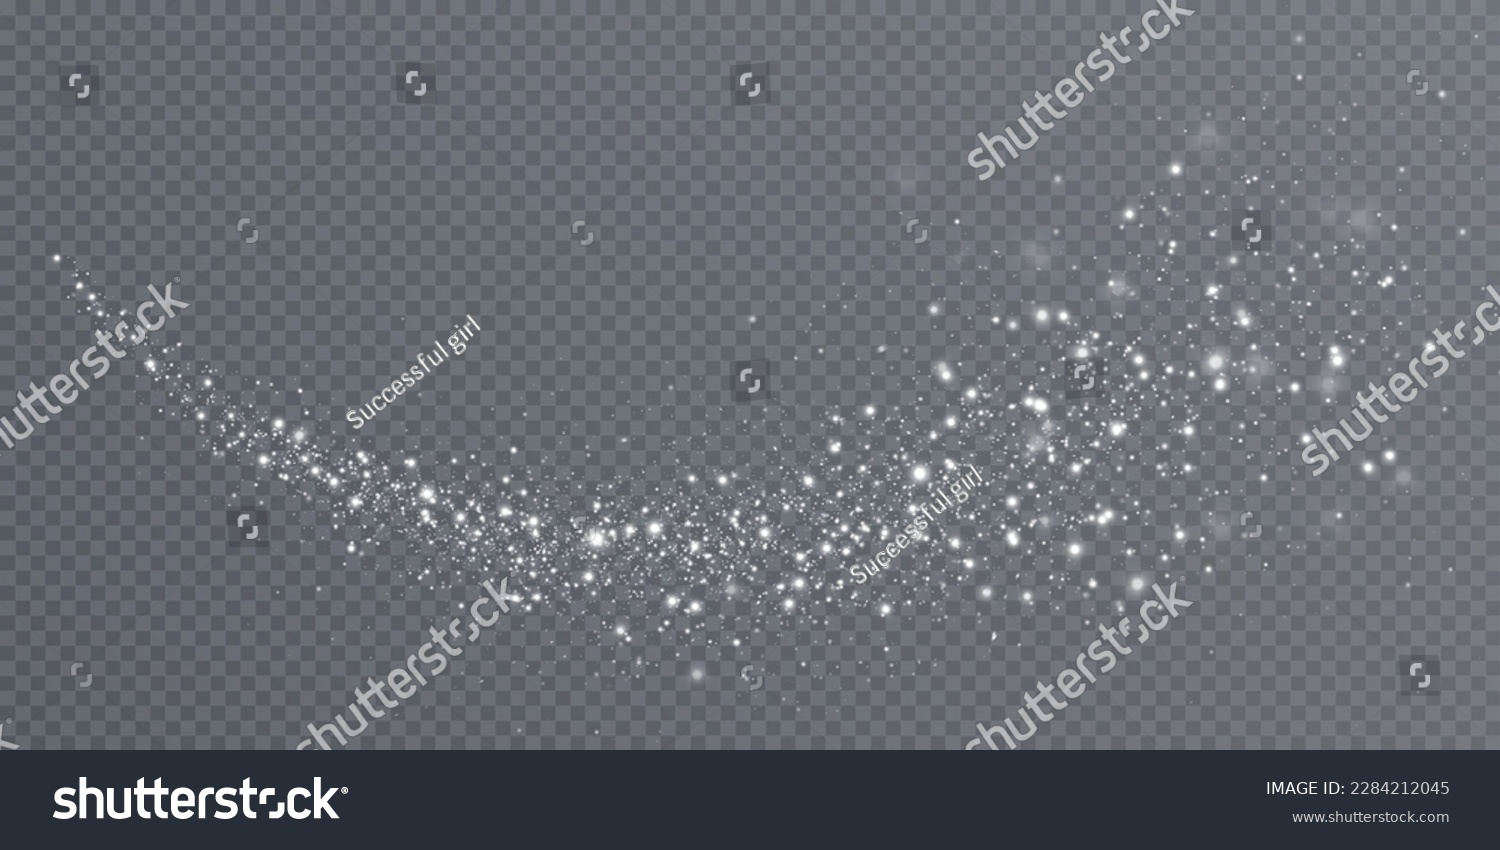 Bokeh light lights effect background. White png dust light. Christmas background of shining dust Christmas glowing light bokeh confetti and spark overlay texture for your design. #2284212045